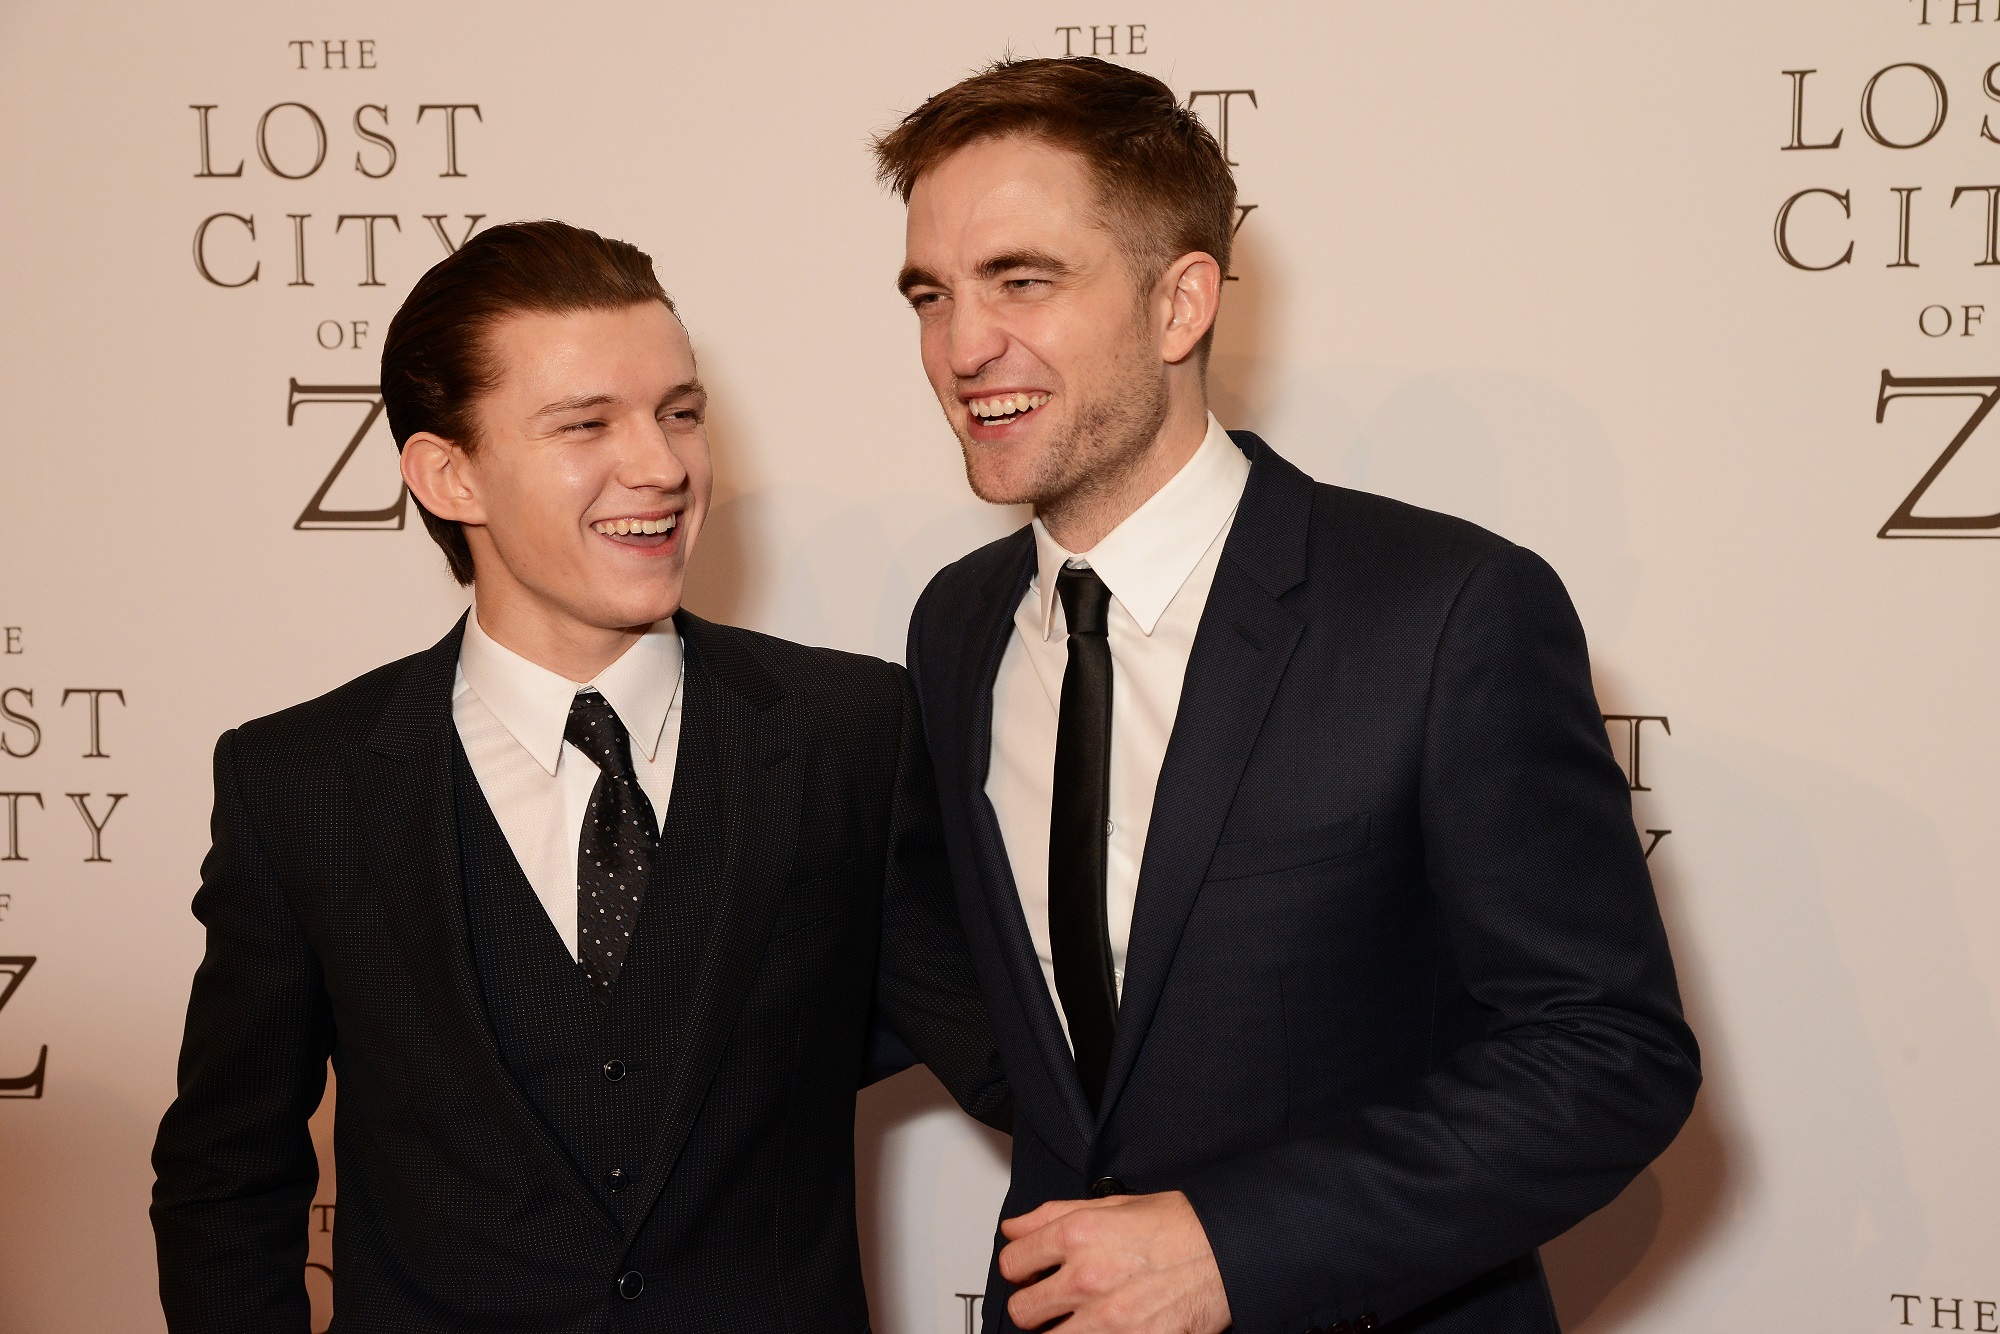 Tom Holland (L) and Robert Pattinson attend the UK premiere of 'The Lost City of Z' on February 16, 2017 in London, England. 